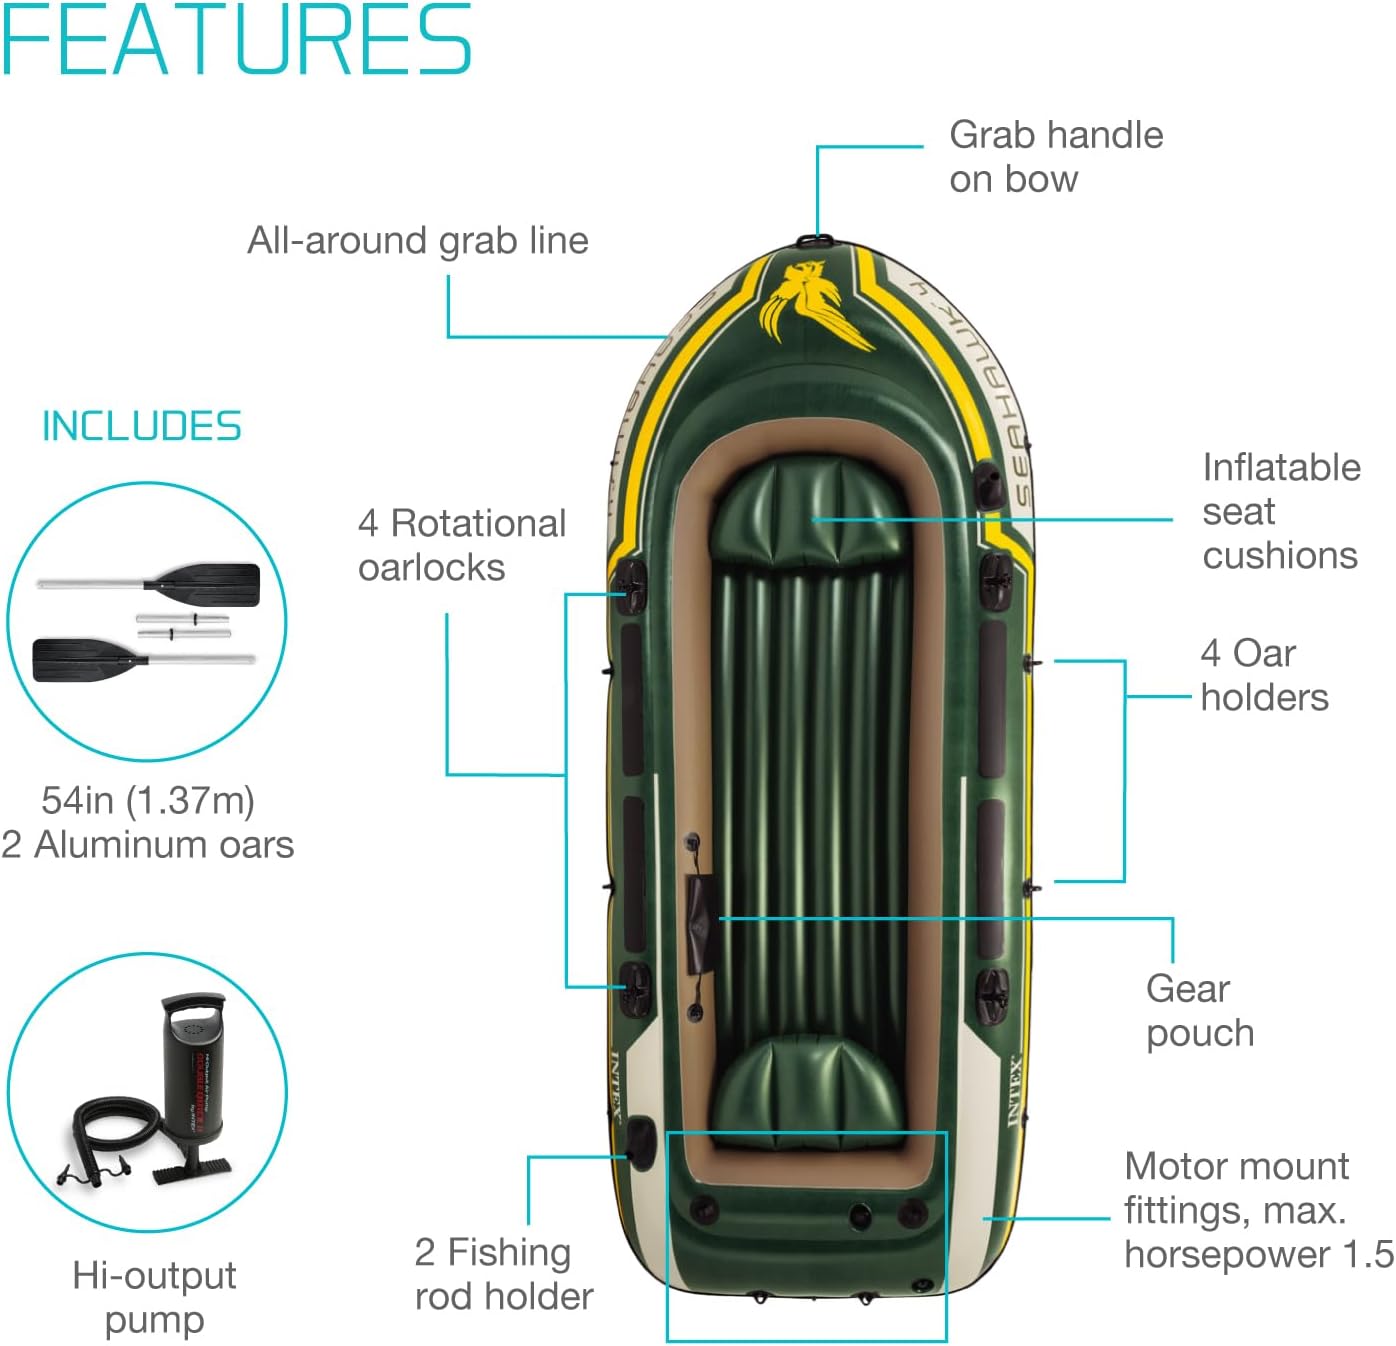 INTEX Seahawk Inflatable Boat Series: Includes Deluxe Aluminum Oars and High-Output Pump – SuperStrong PVC – Fishing Rod Holders – Heavy Duty Grab Handles – Gear Pouch - INTEX Seahawk Inflatable Boat Series Review